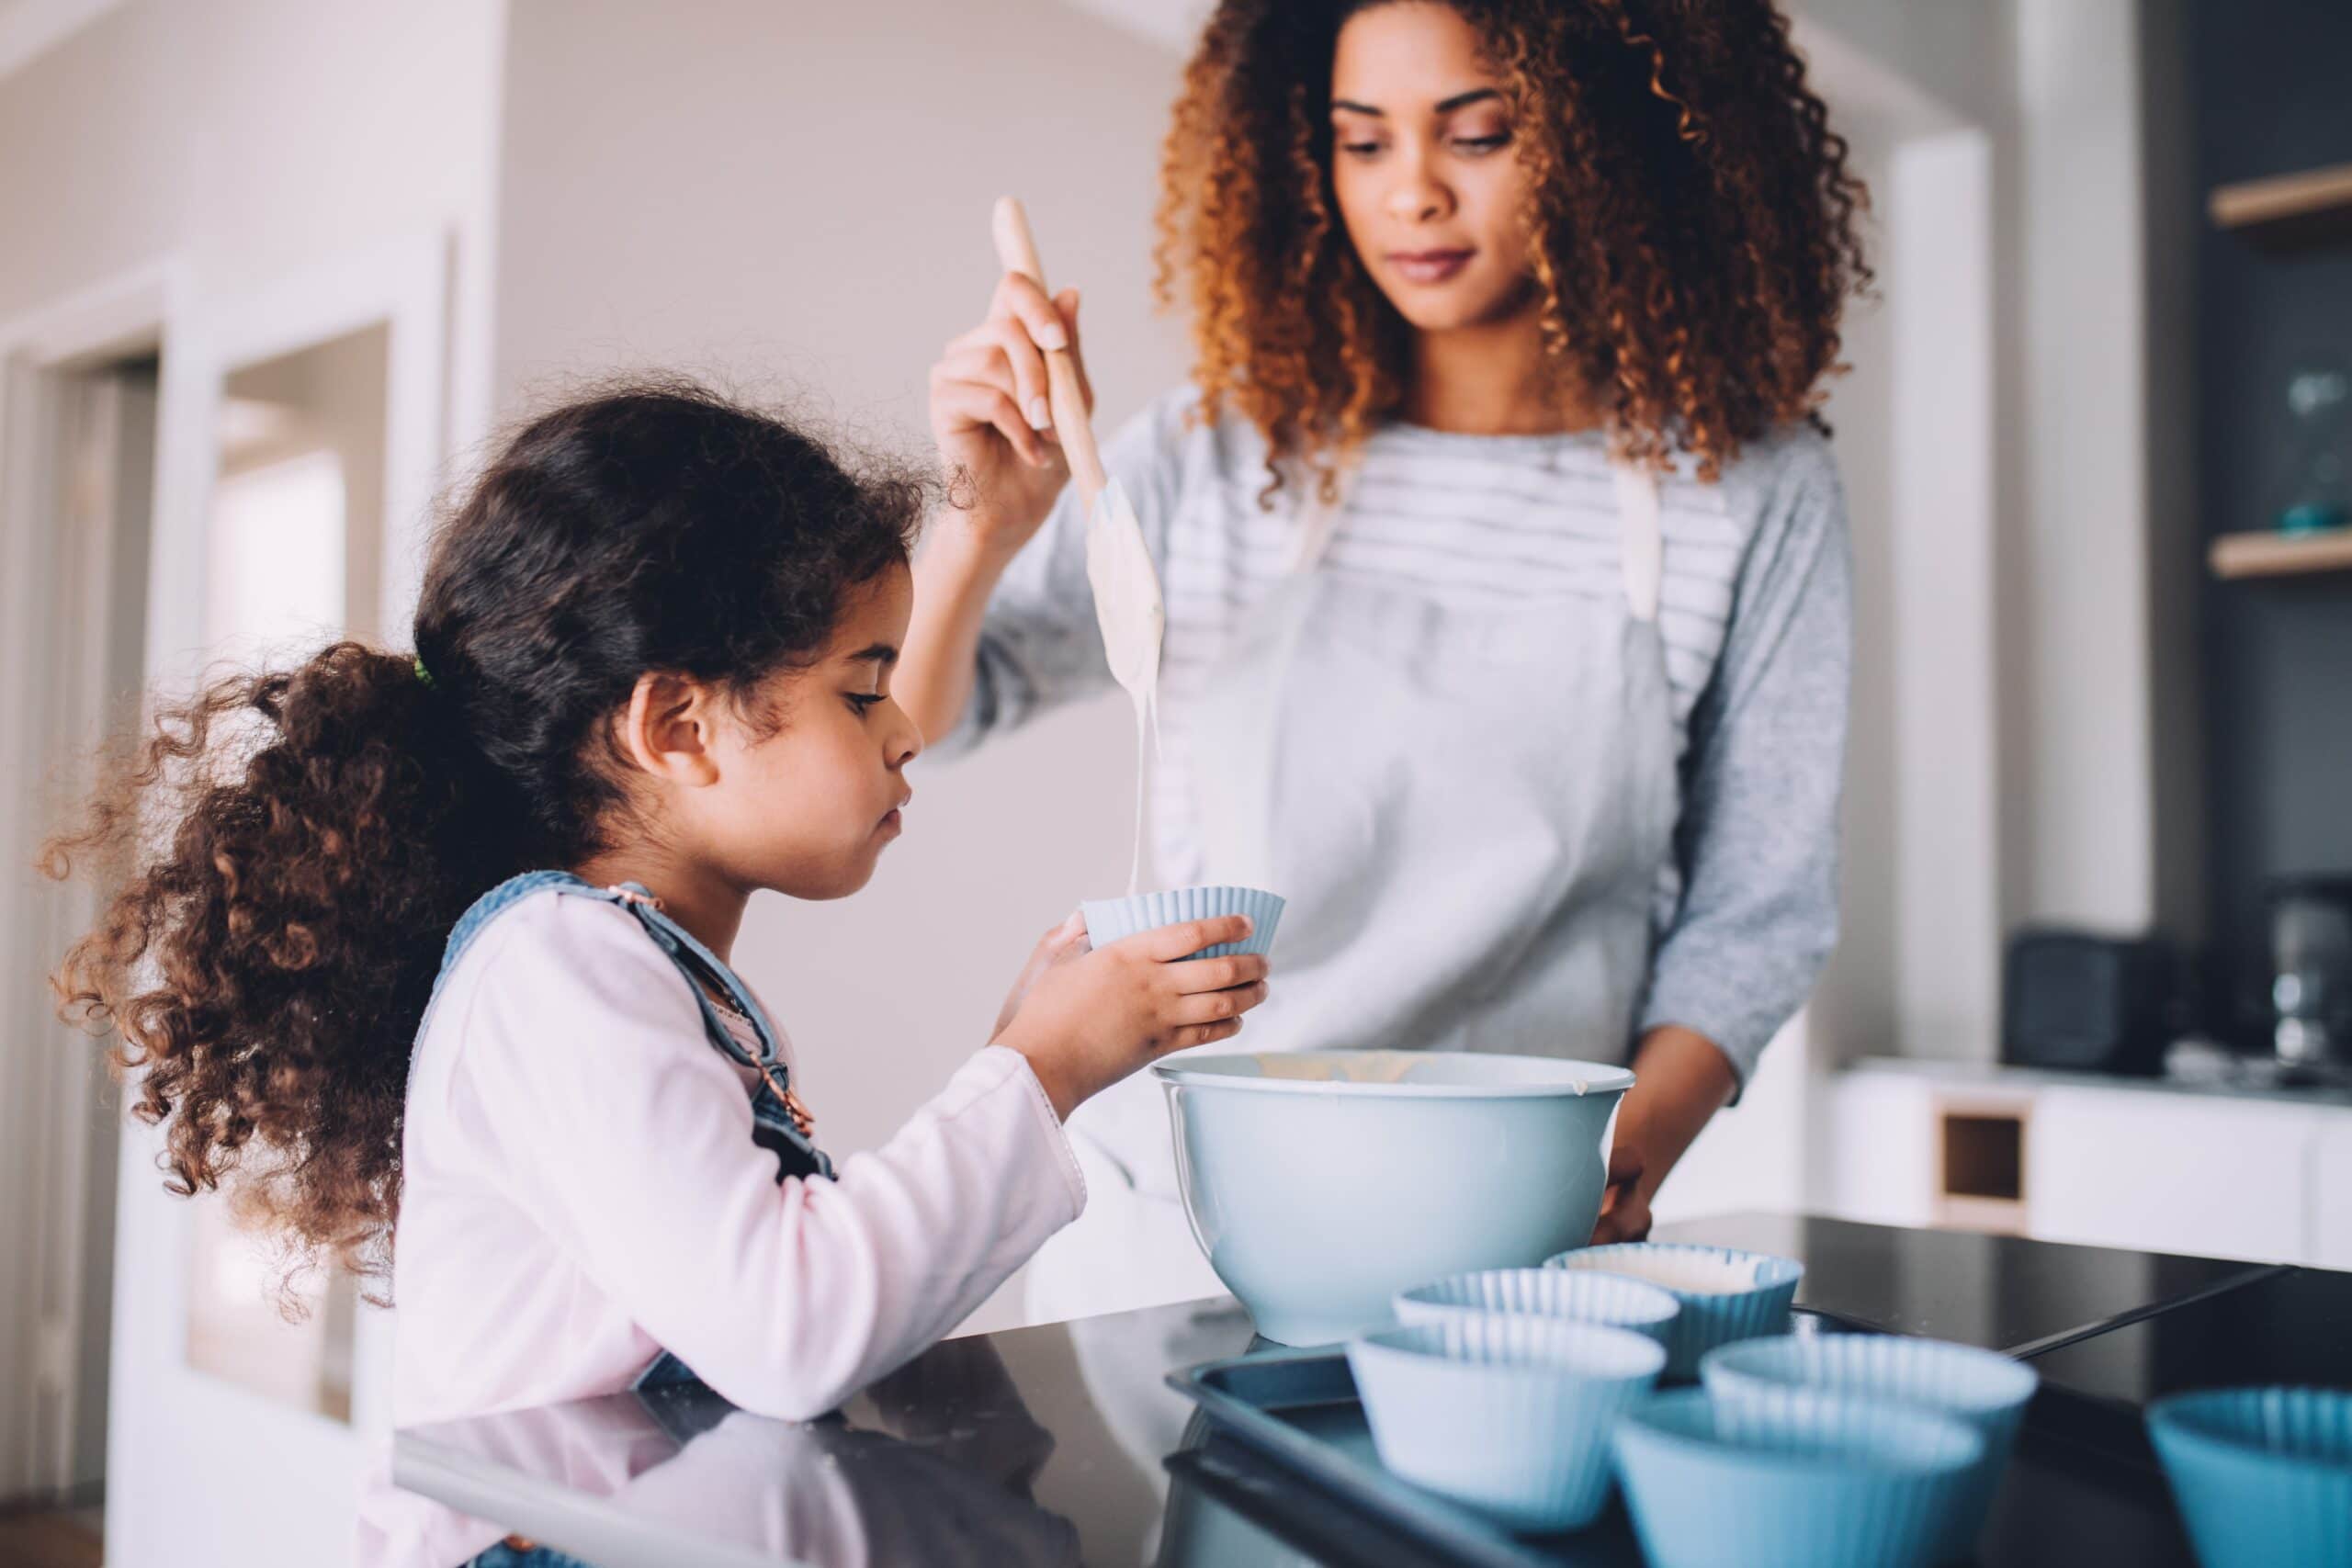 Practical Tips for Getting Kids in the Kitchen